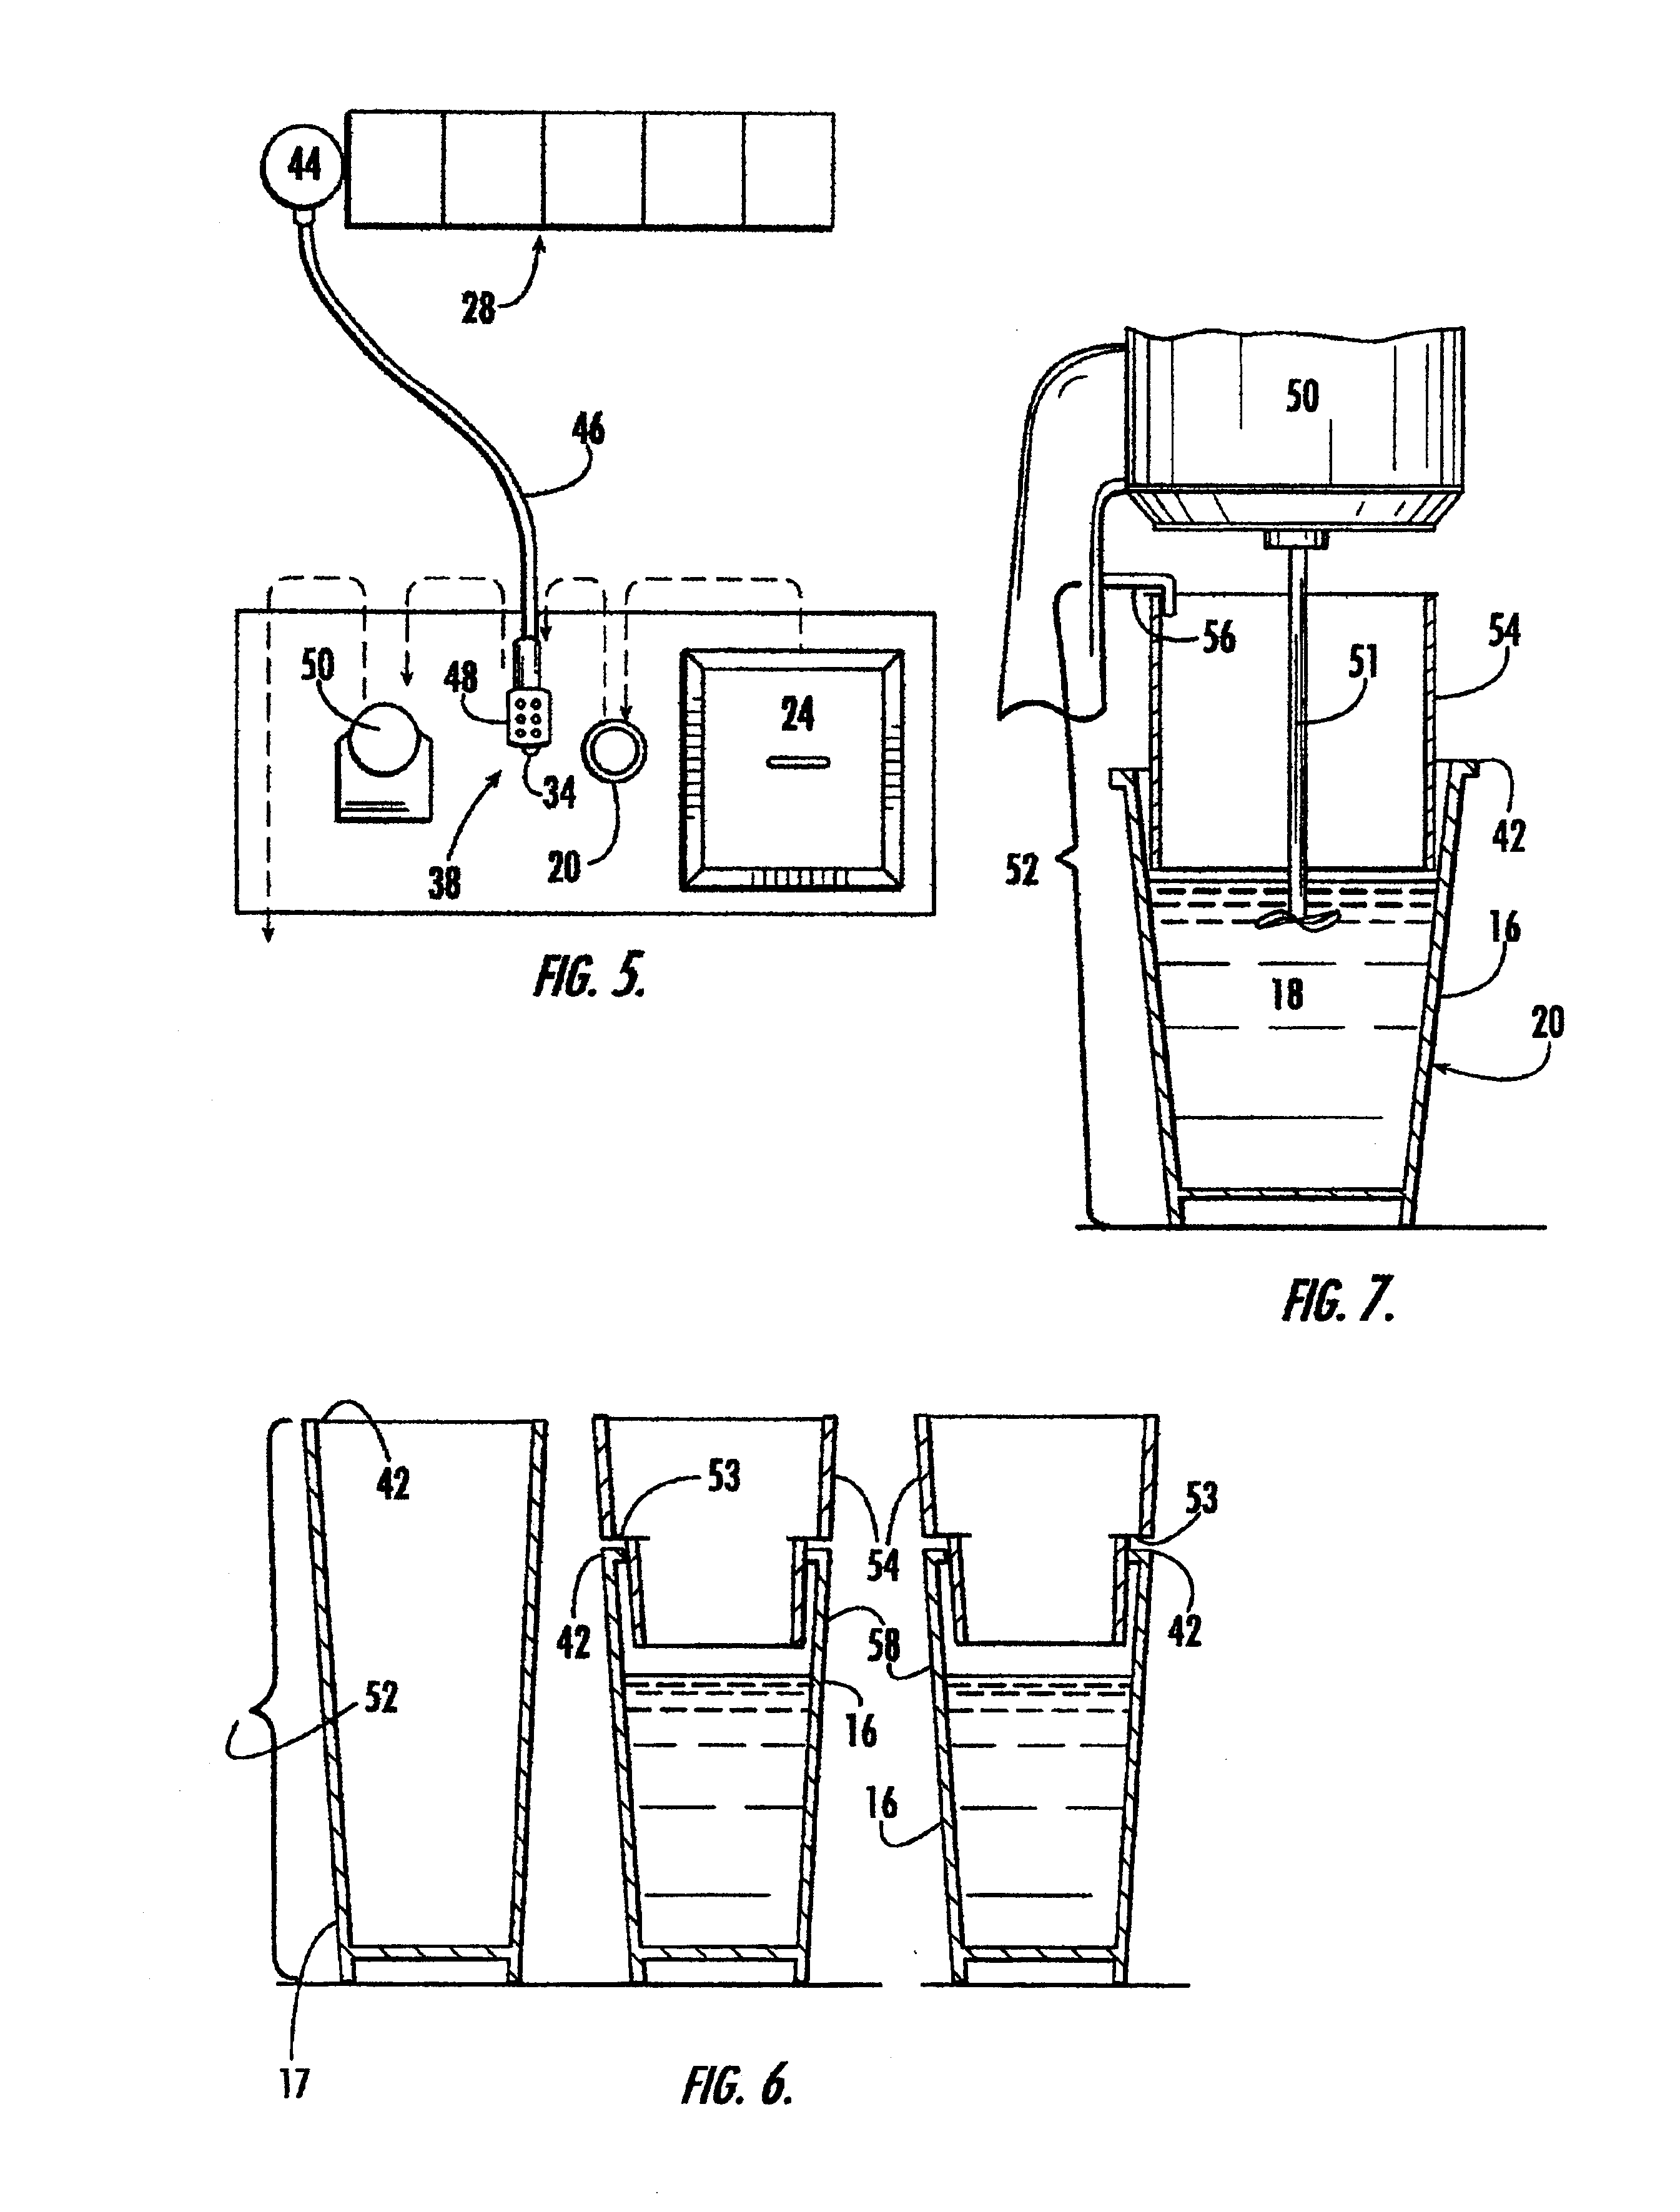 Slurried confection preparation and flavor-injected blending system and method